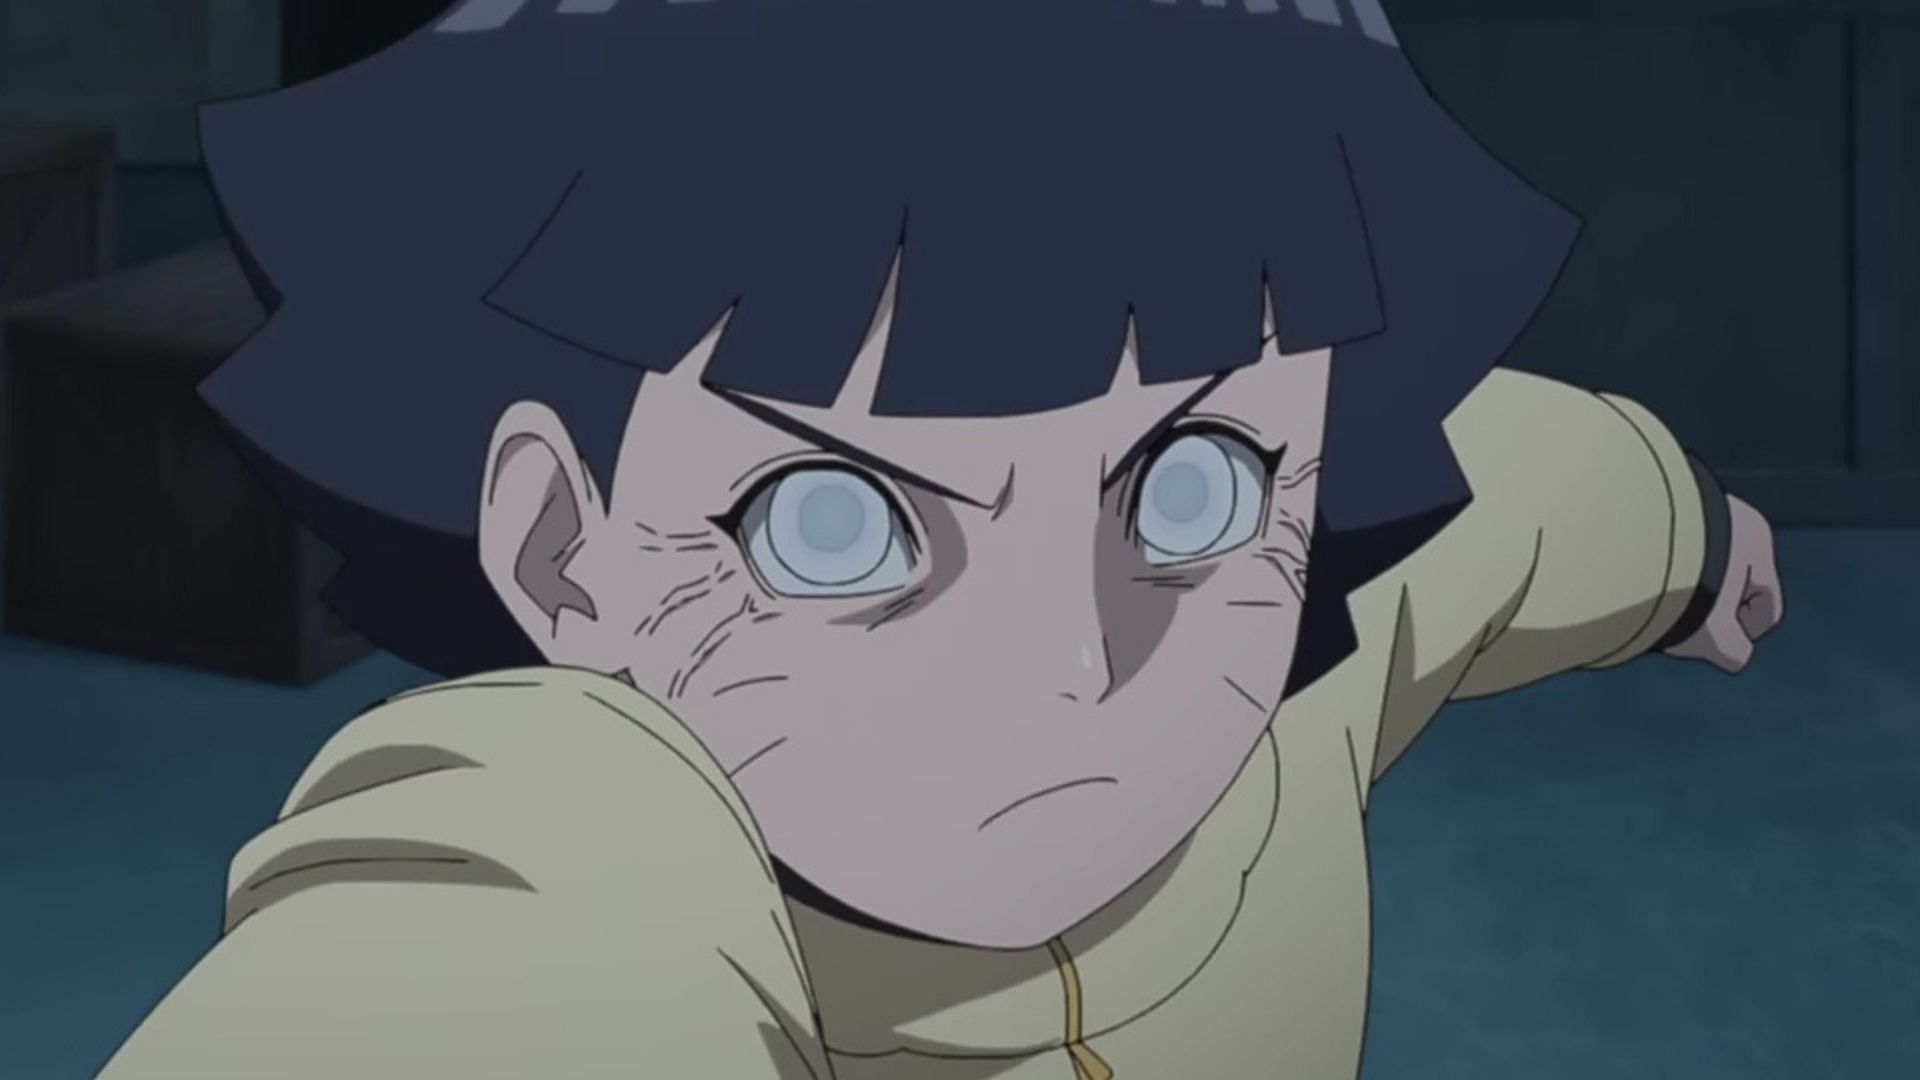 Understanding whether or not Himawari might have Naruto